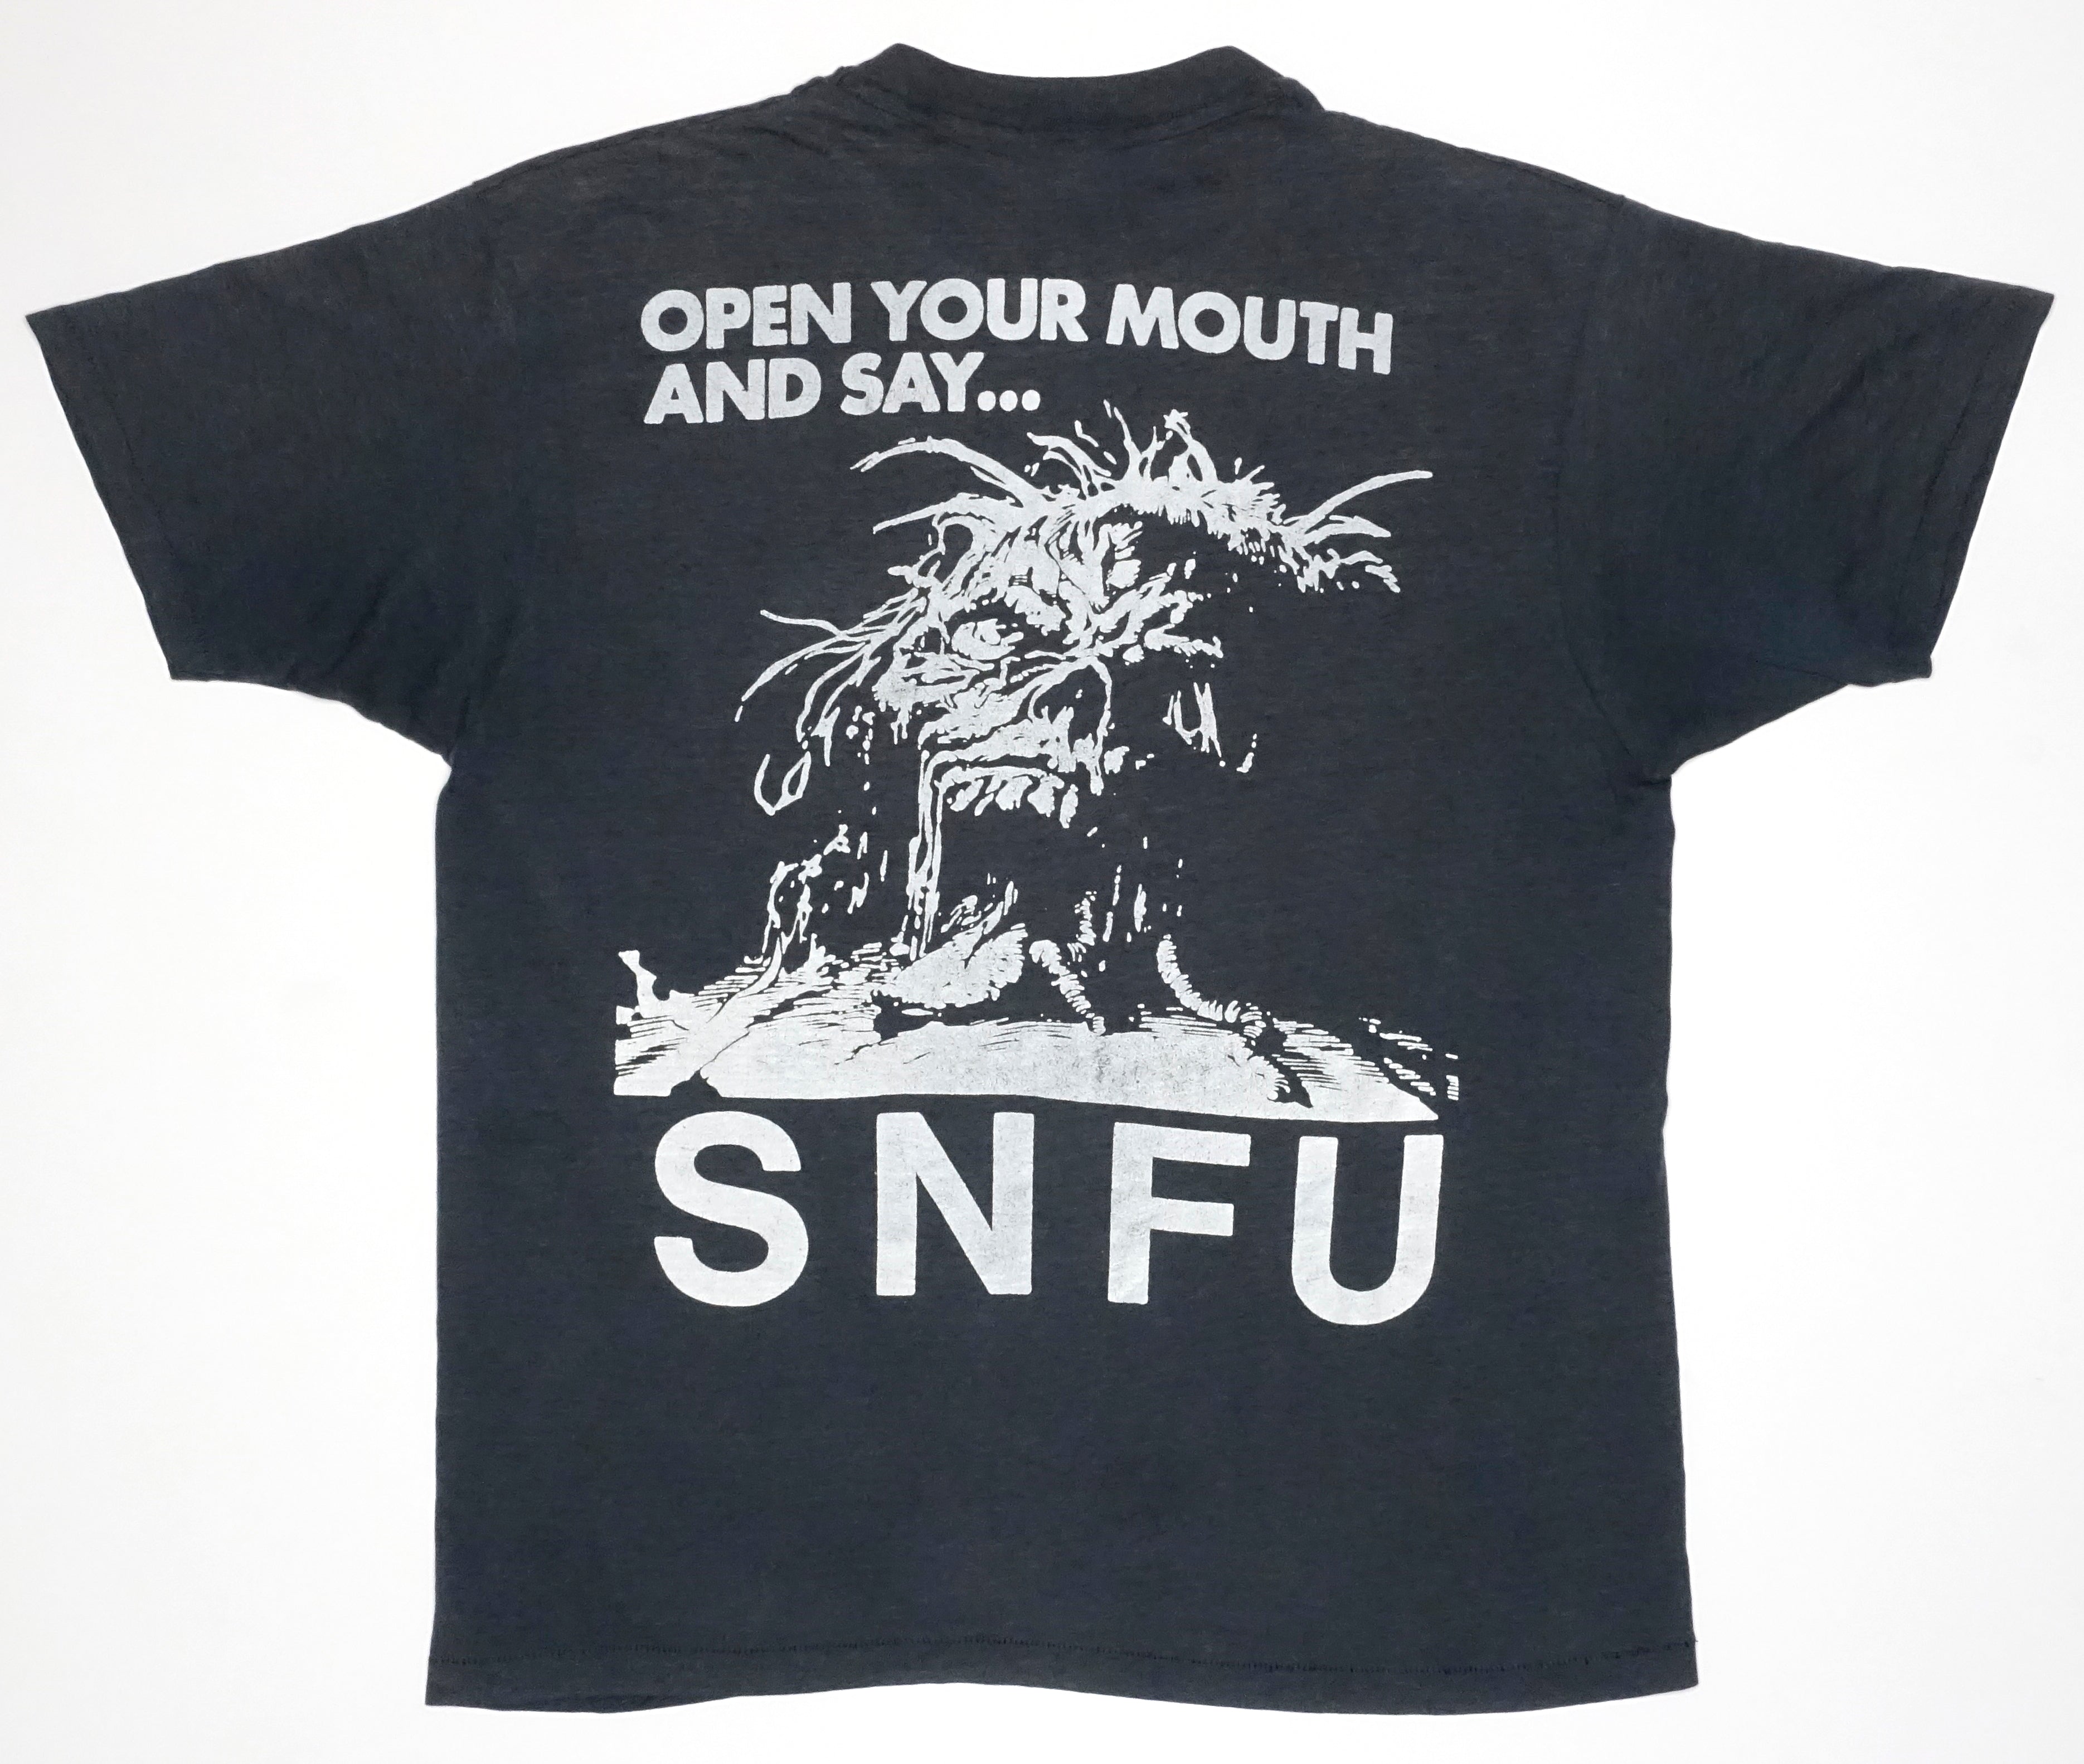 SNFU - Open Your Mouth And Say... Pocket Print Tour Shirt Size Large